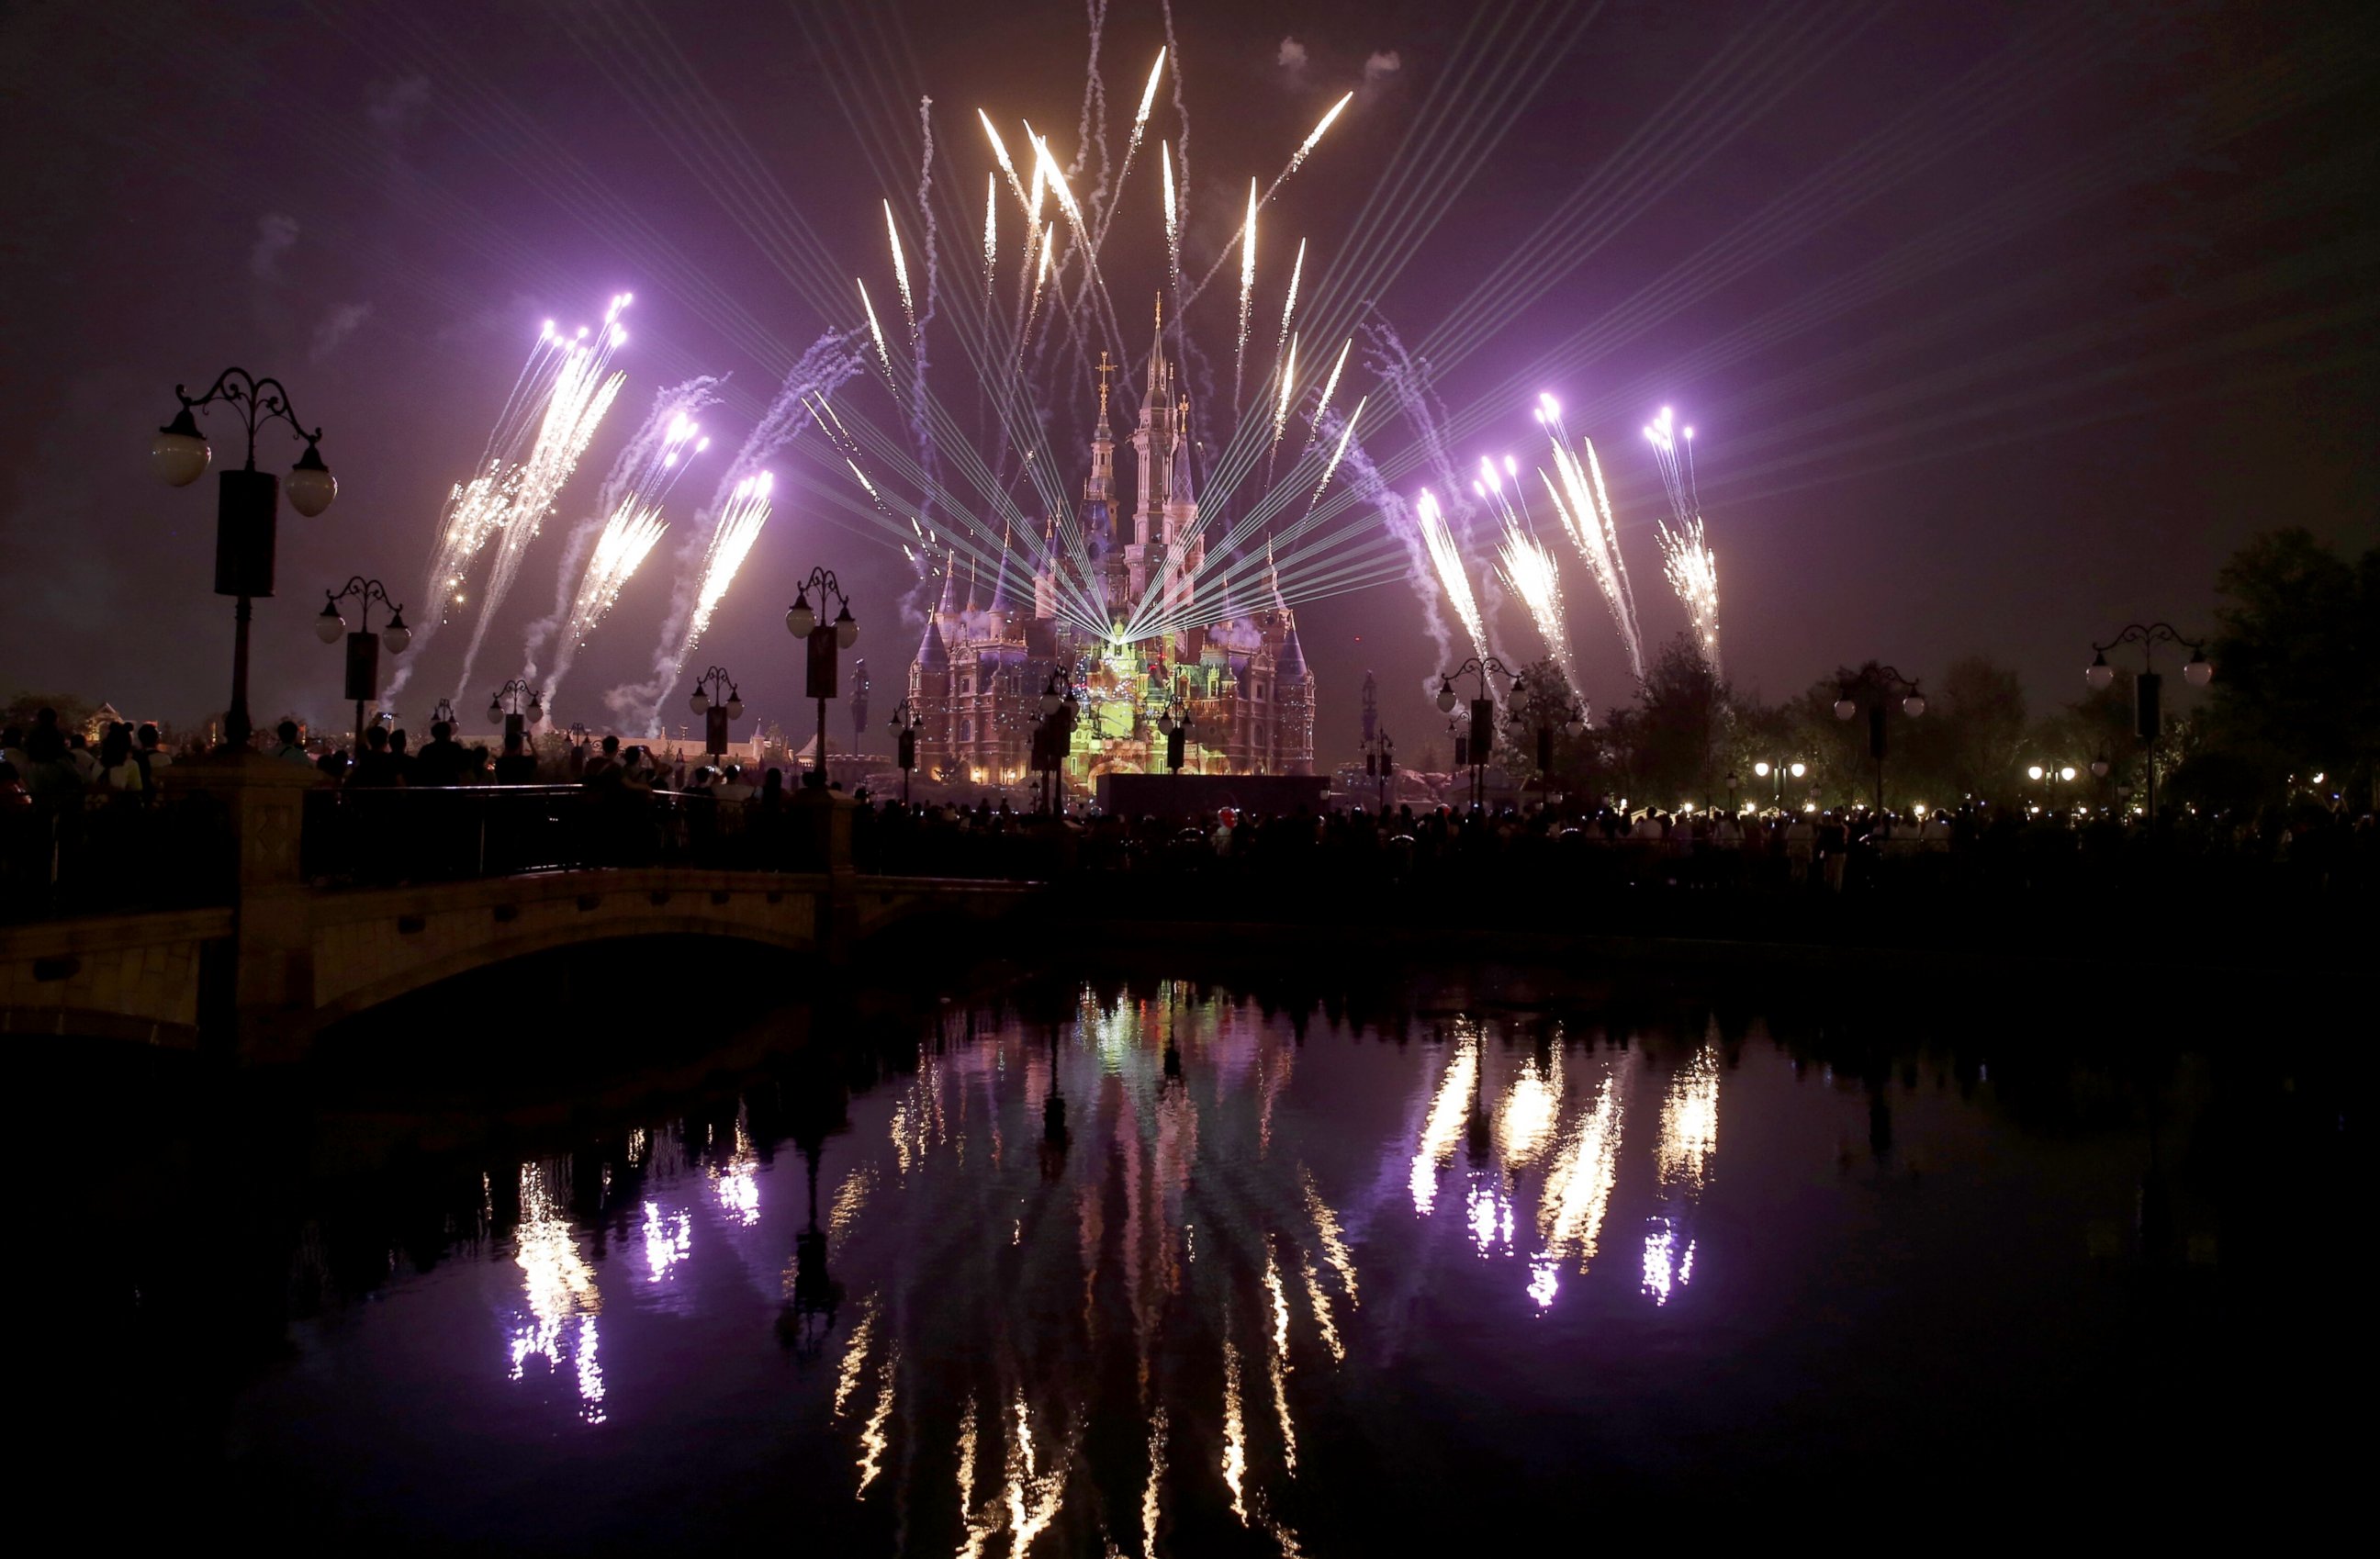 PHOTO: Fireworks light up the Enchanted Storybook Castle as a shining symbol of Shanghai Disneyland on May 25, 2016 in Shanghai, China.